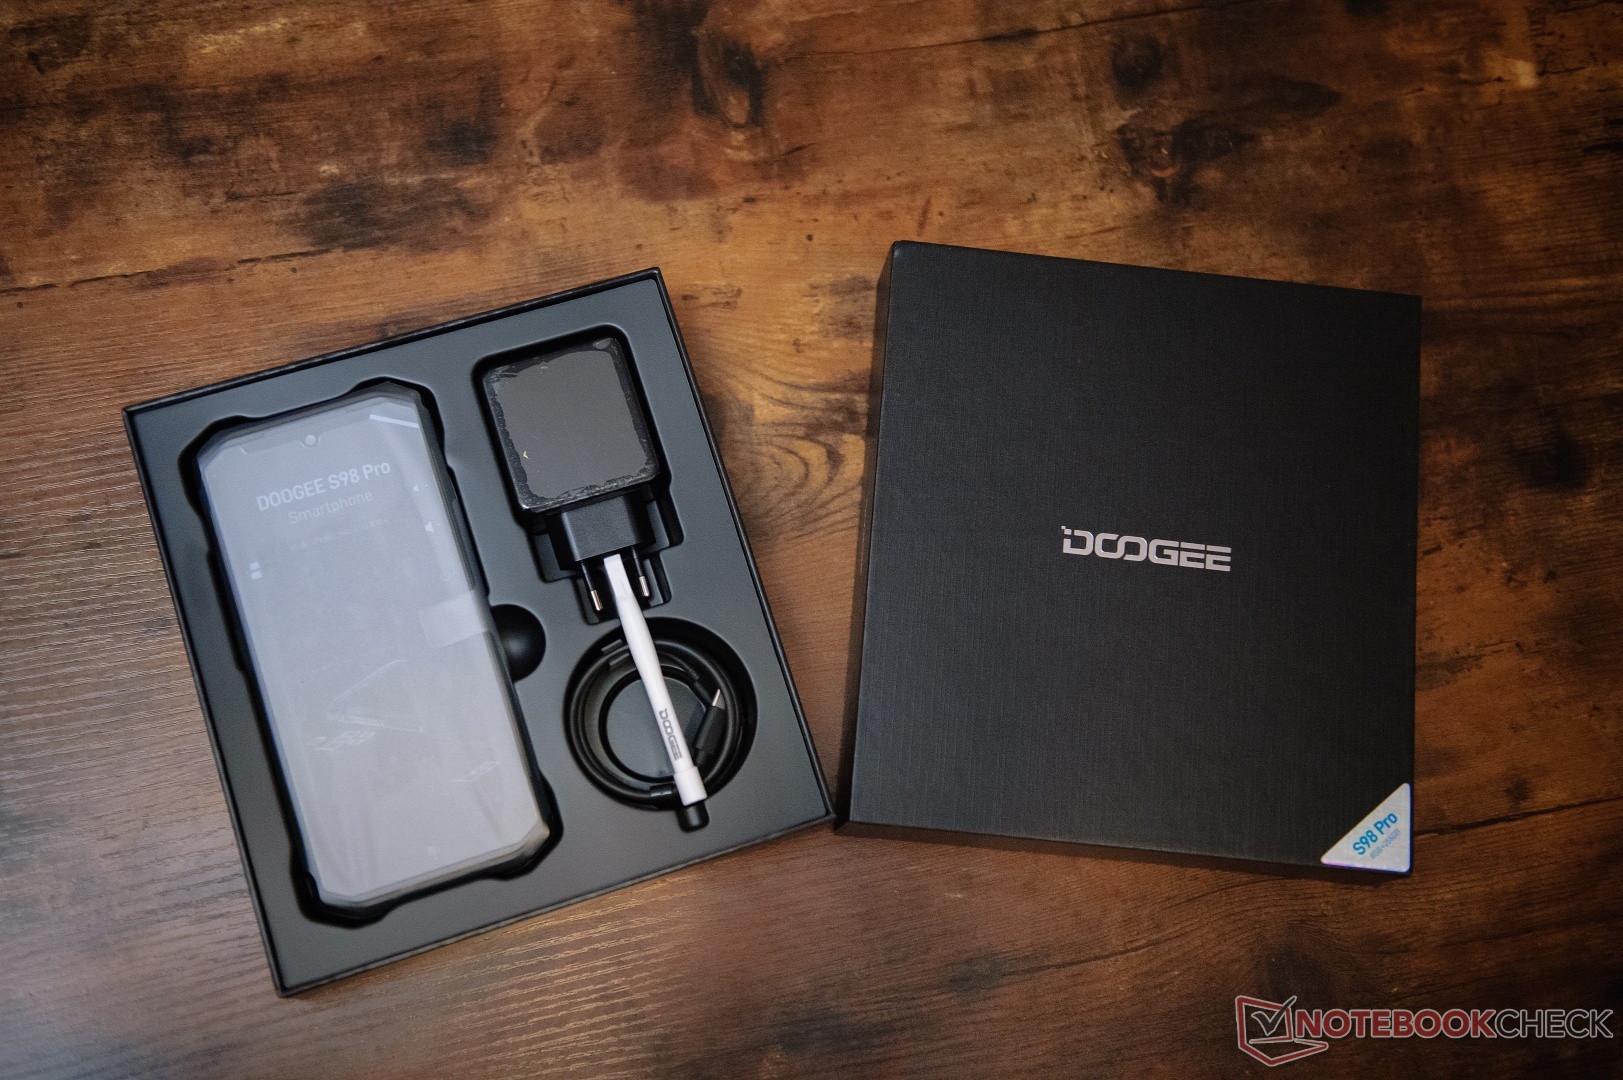 Promoted] Doogee S98 Pro Set To Hit The Market In Early June With Thermal  Imaging and Alien-Inspired Design - Talk Android